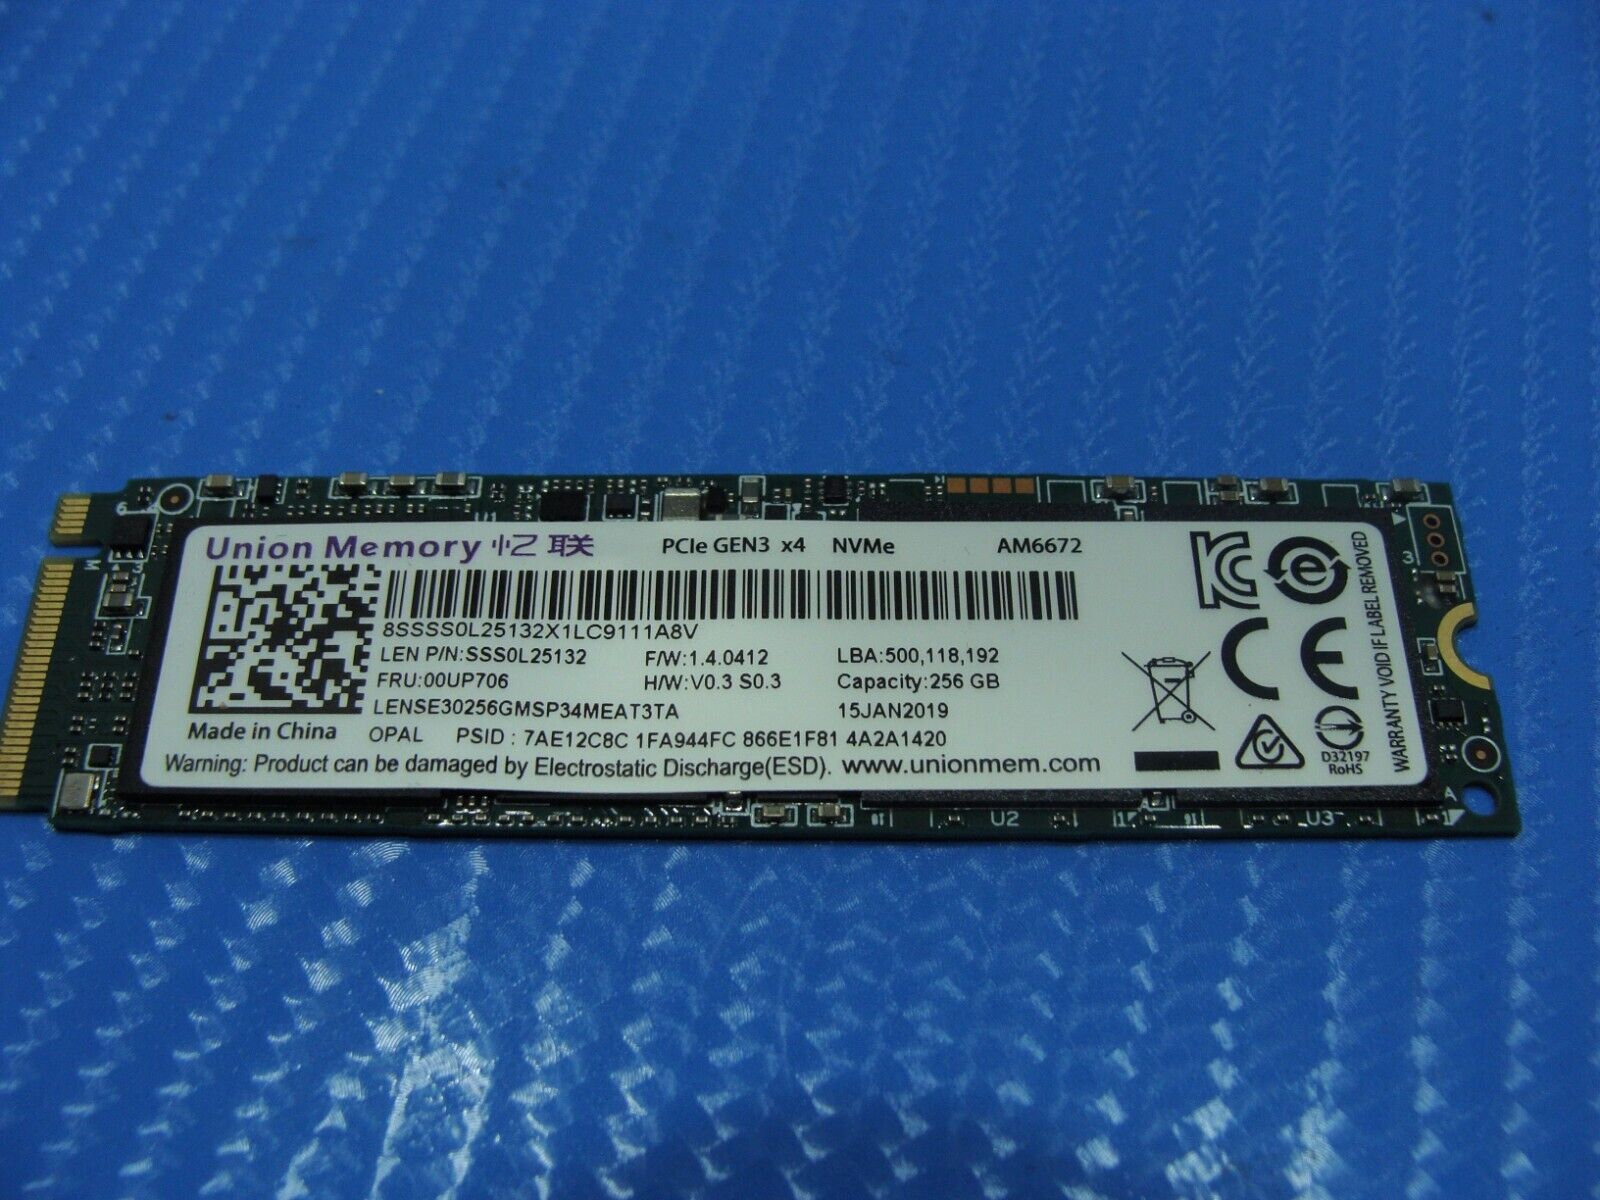 Lenovo E580 Union Memory 256Gb NVMe M.2 SSD Solid State Drive 00UP706 SSS0L25132